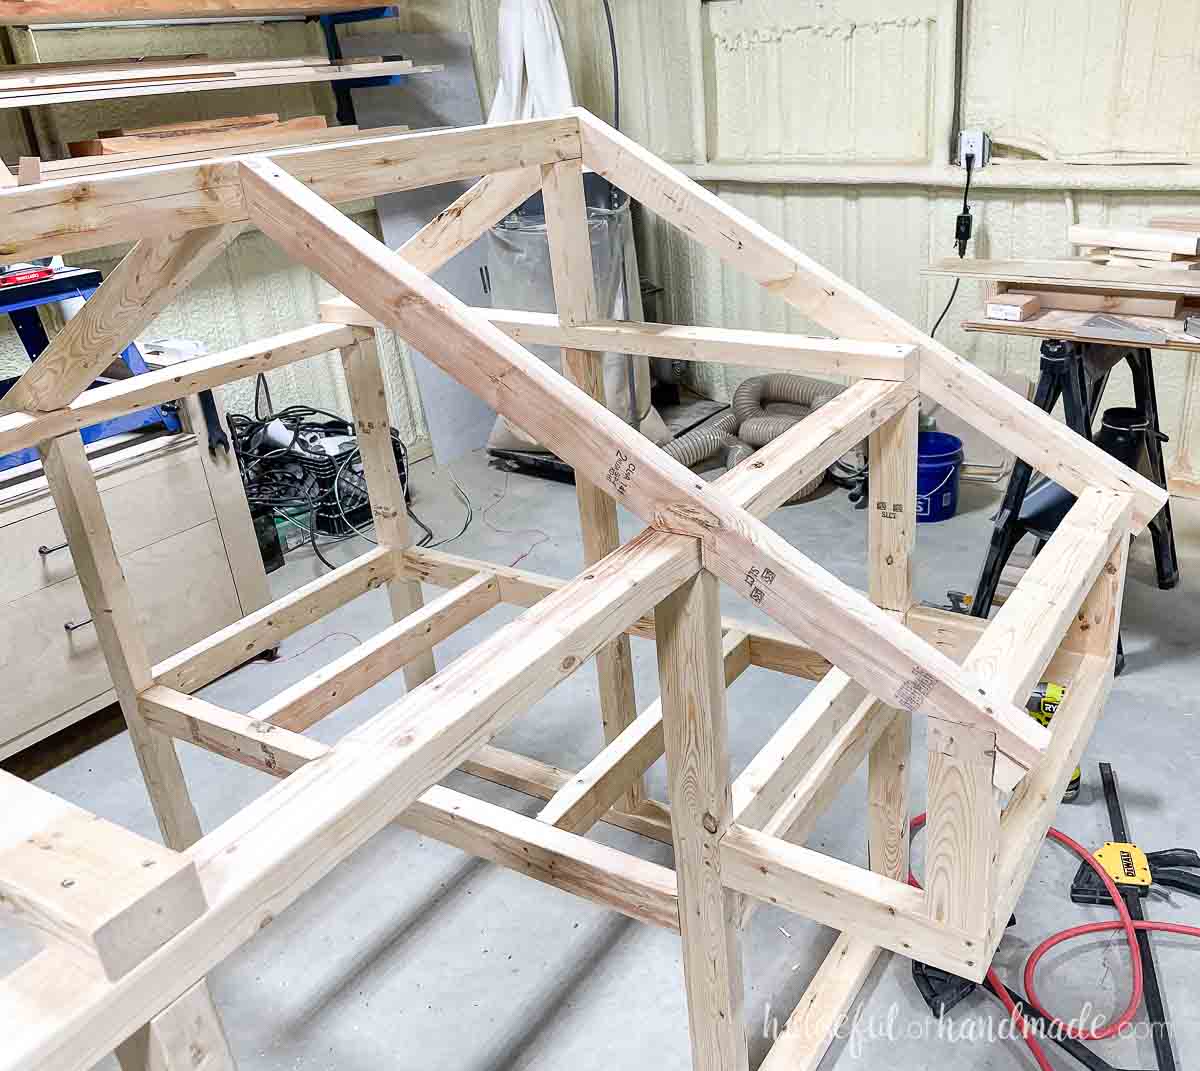 Notching and attaching center rafter. 